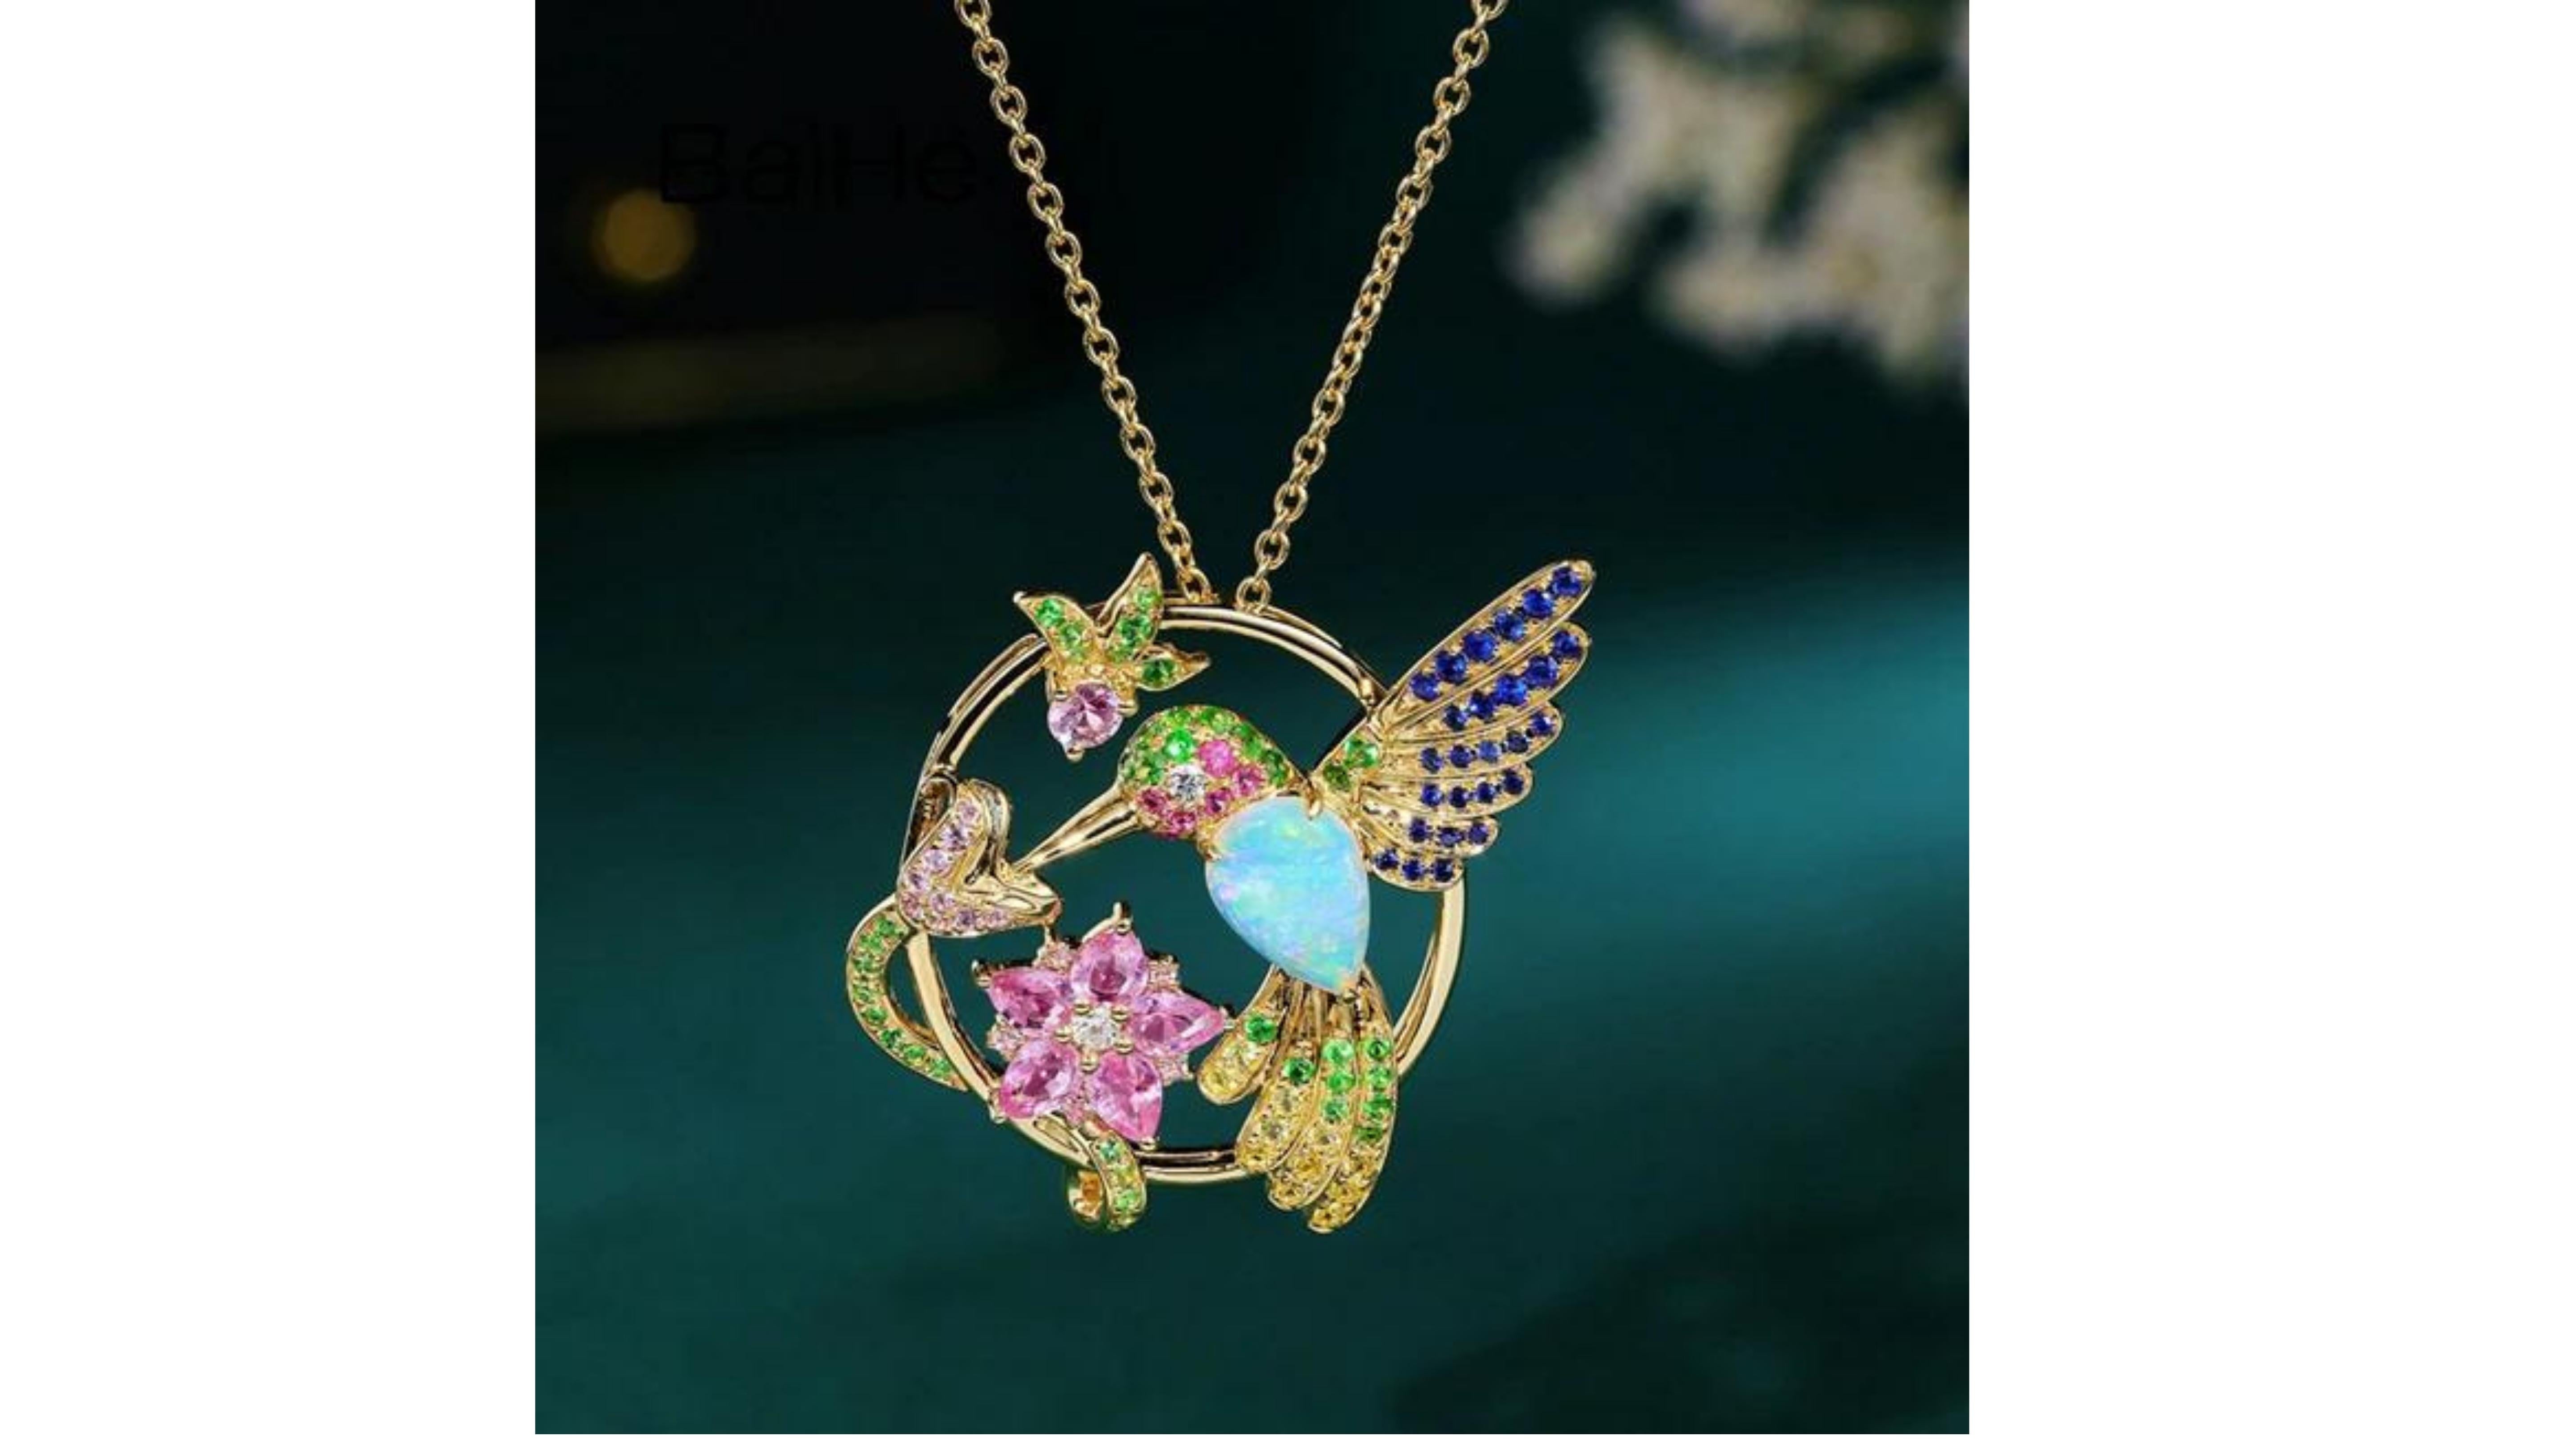 
Opal Diamond  Blue Sapphire Tsavorite Diamond Humming Bird Necklace 18 Karat  Yellow Gold  is very unique and has this tropical look with the Hummingbird on. It shows what can be made too if you are looking for anything specific or would like a